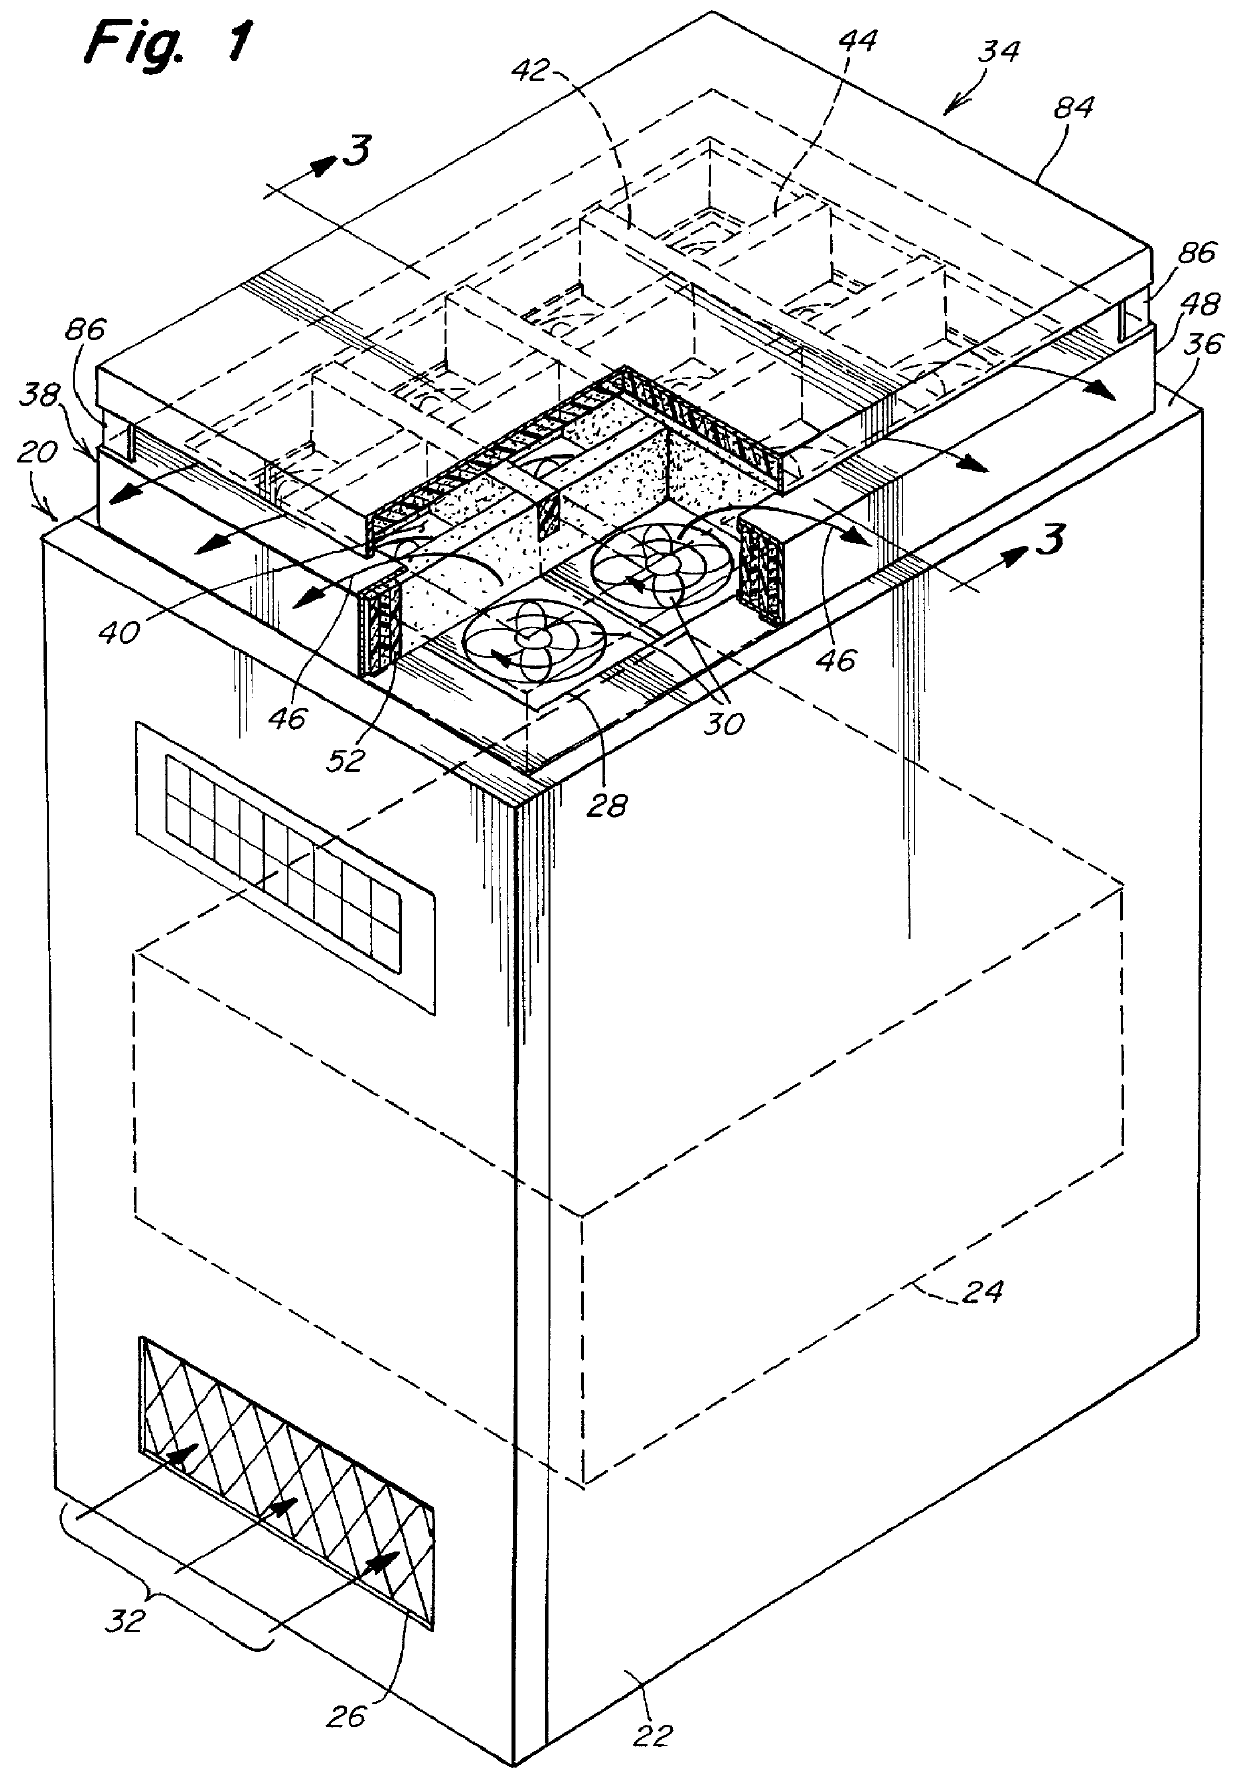 Noise reduction hood for an electronic system enclosure